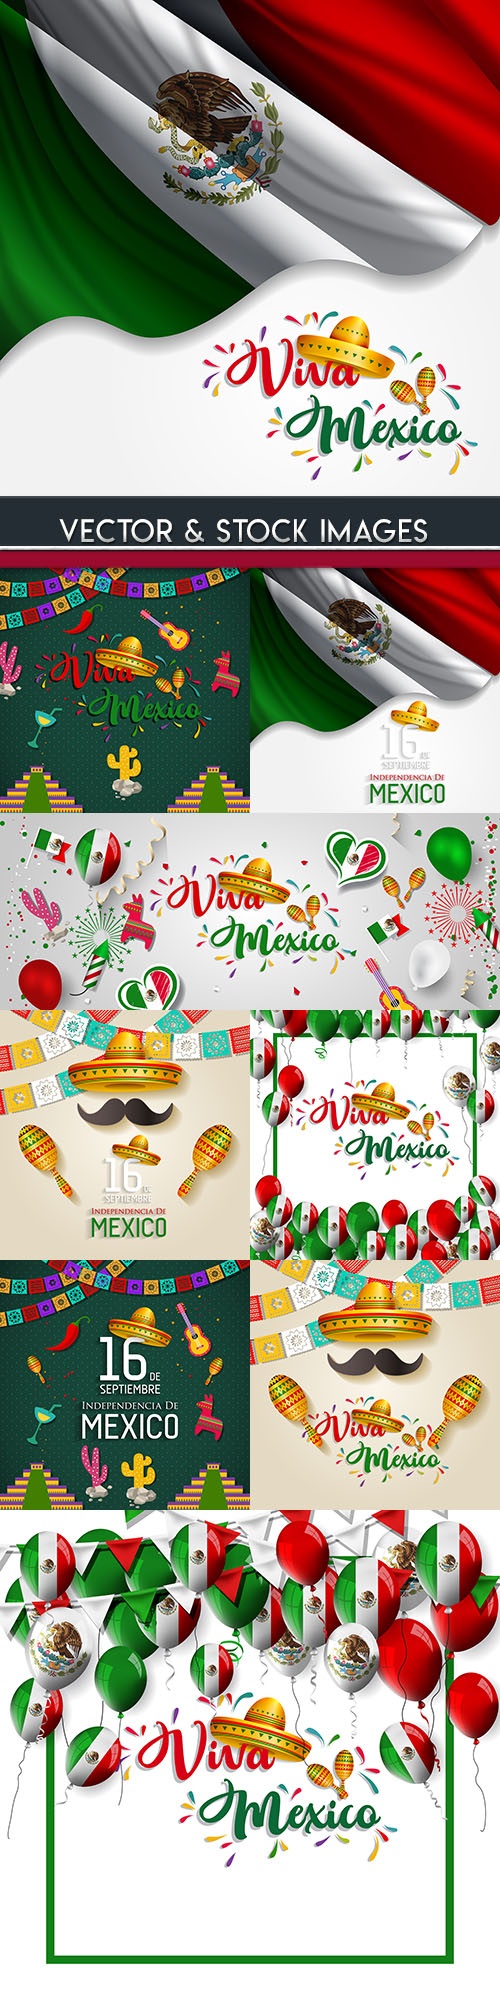 Mexico national day and Viva Mexico illustration design